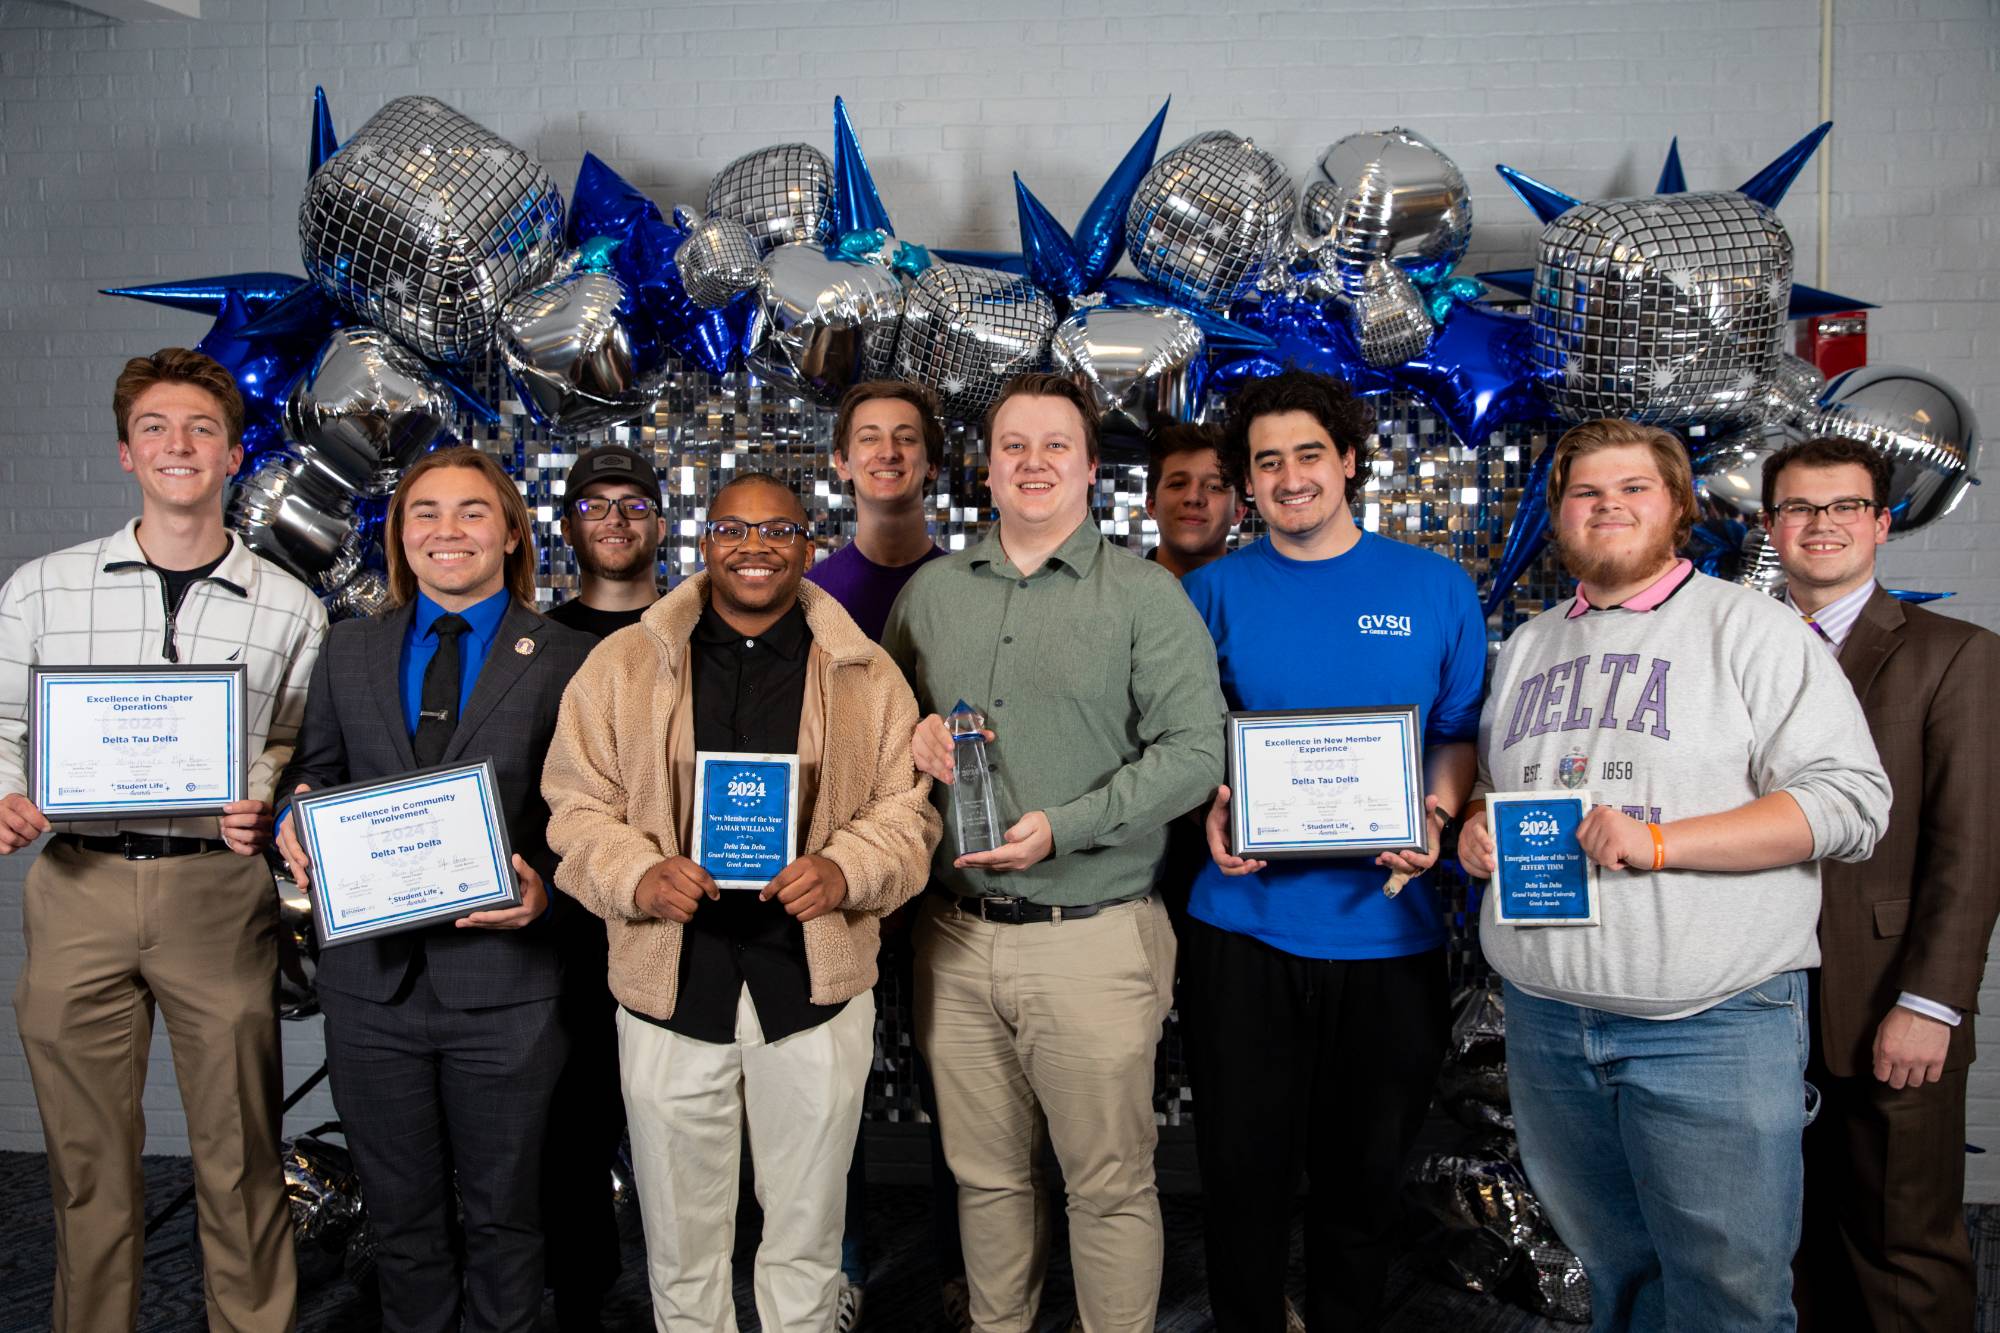 A group of greek life students holding awards